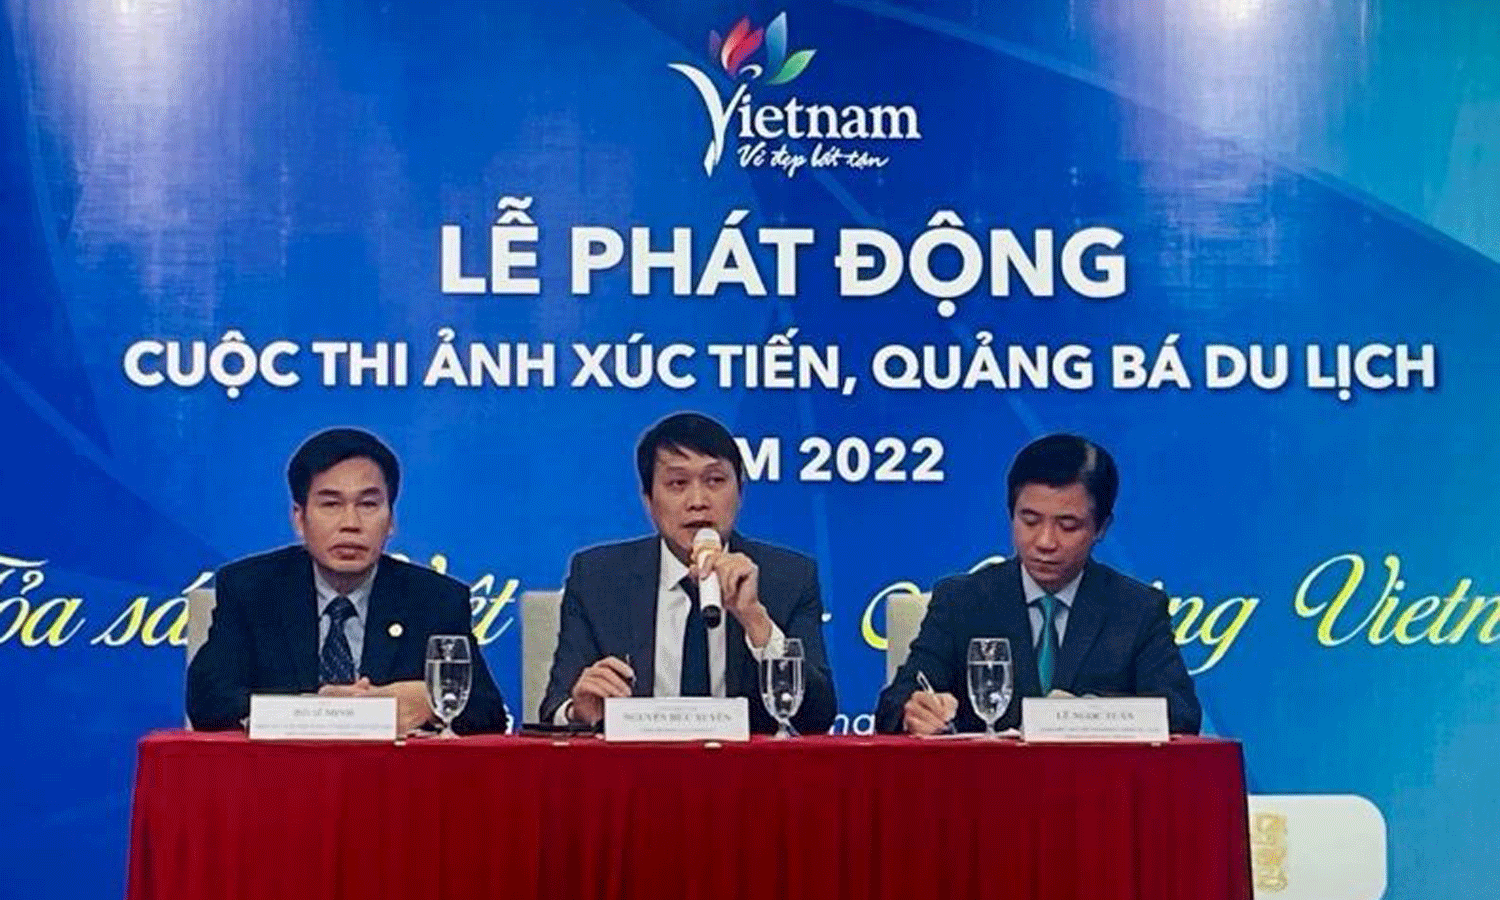 ABO/NDO- A photo contest themed “Amazing Vietnam” was launched in Hanoi on December 21, aiming to promote the country’s tourism industry post COVID-19 as well as to attract more domestic and international tourists.